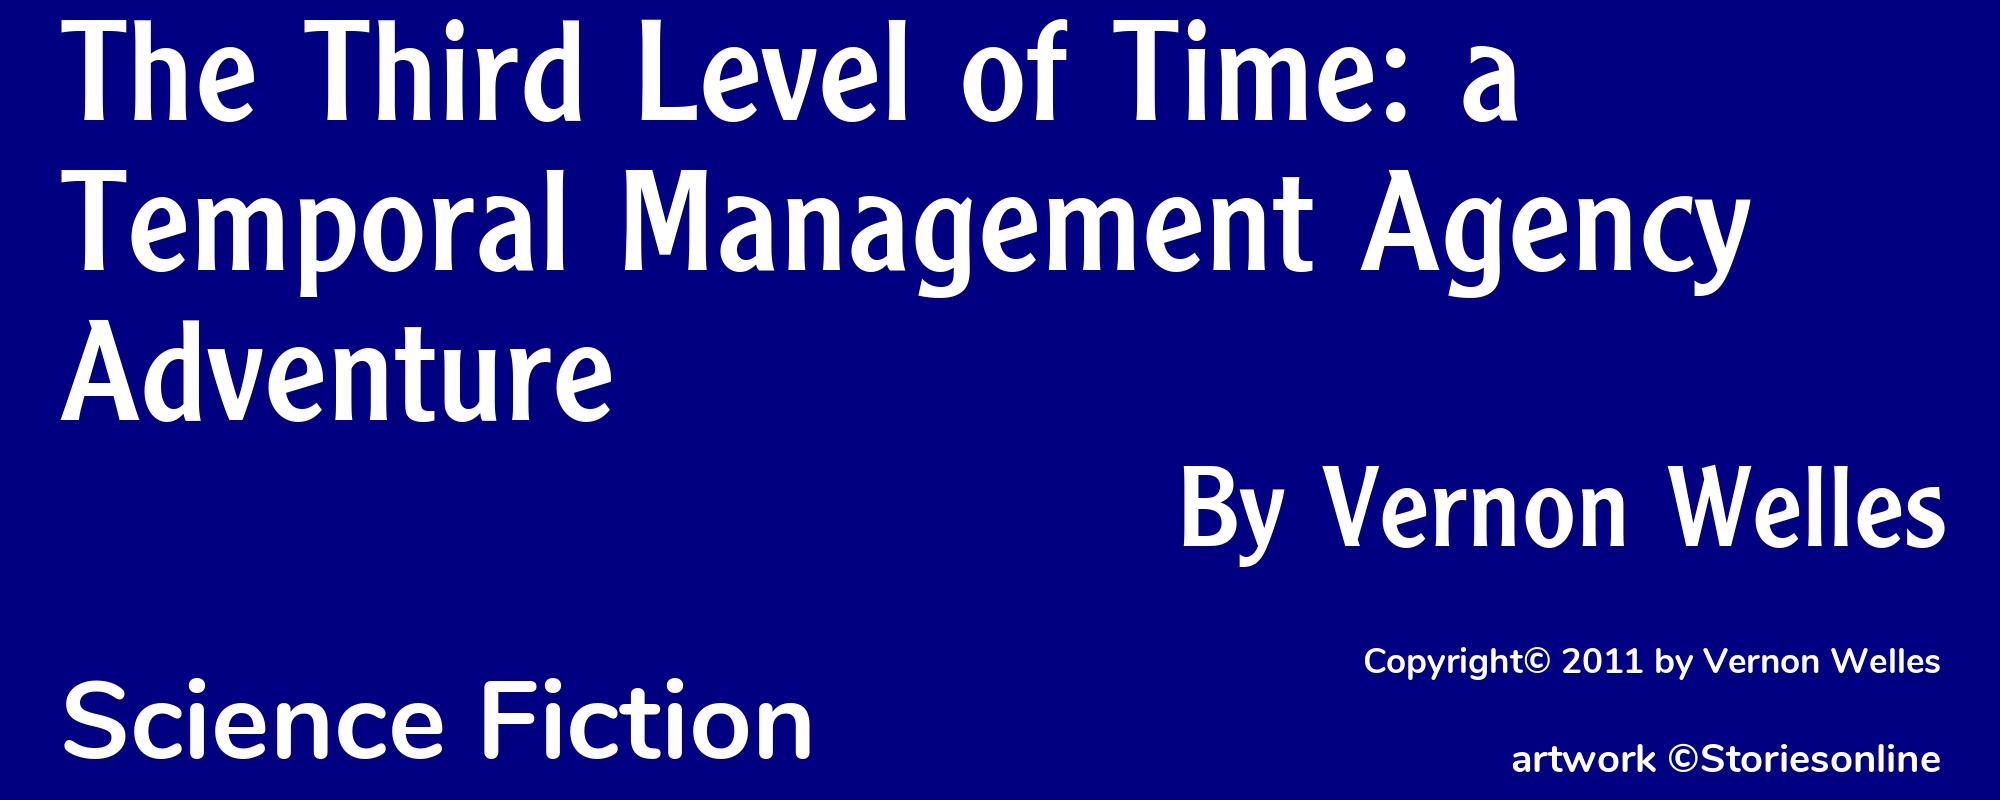 The Third Level of Time: a Temporal Management Agency Adventure - Cover